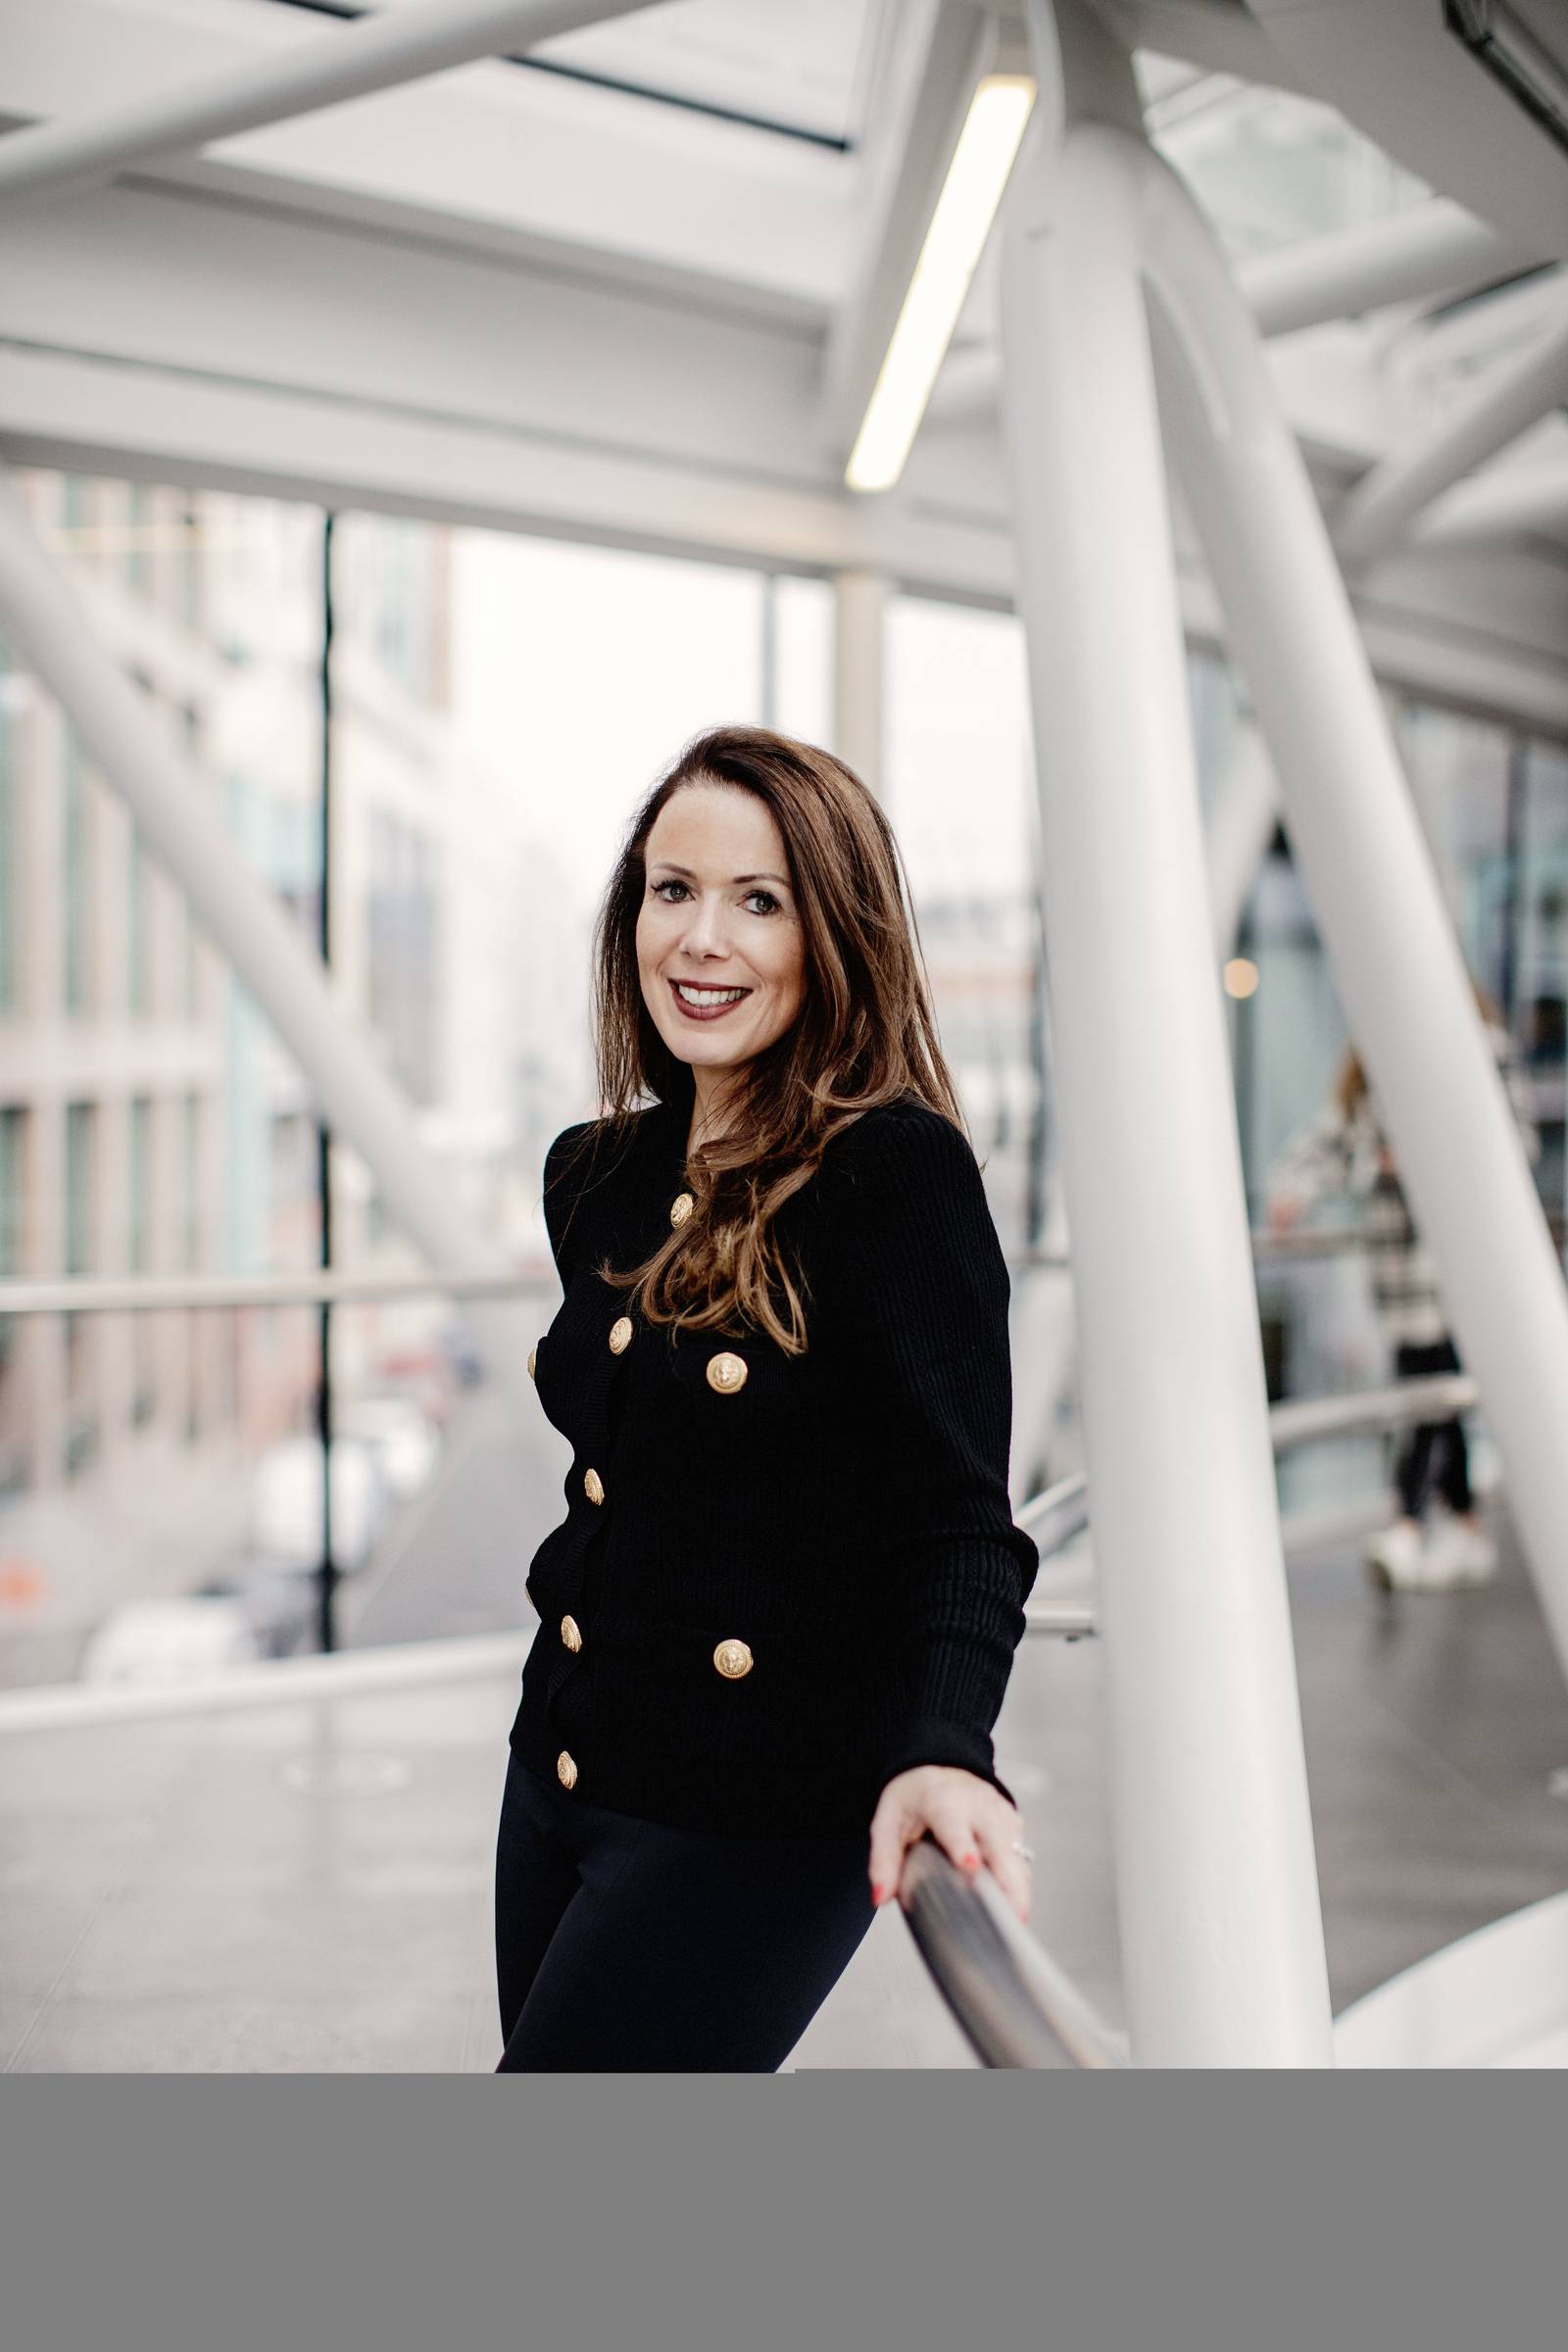 Google Ireland has announced the appointment of Vanessa Hartley as Managing Director of its EMEA Large Customer Sales (LCS) Hub